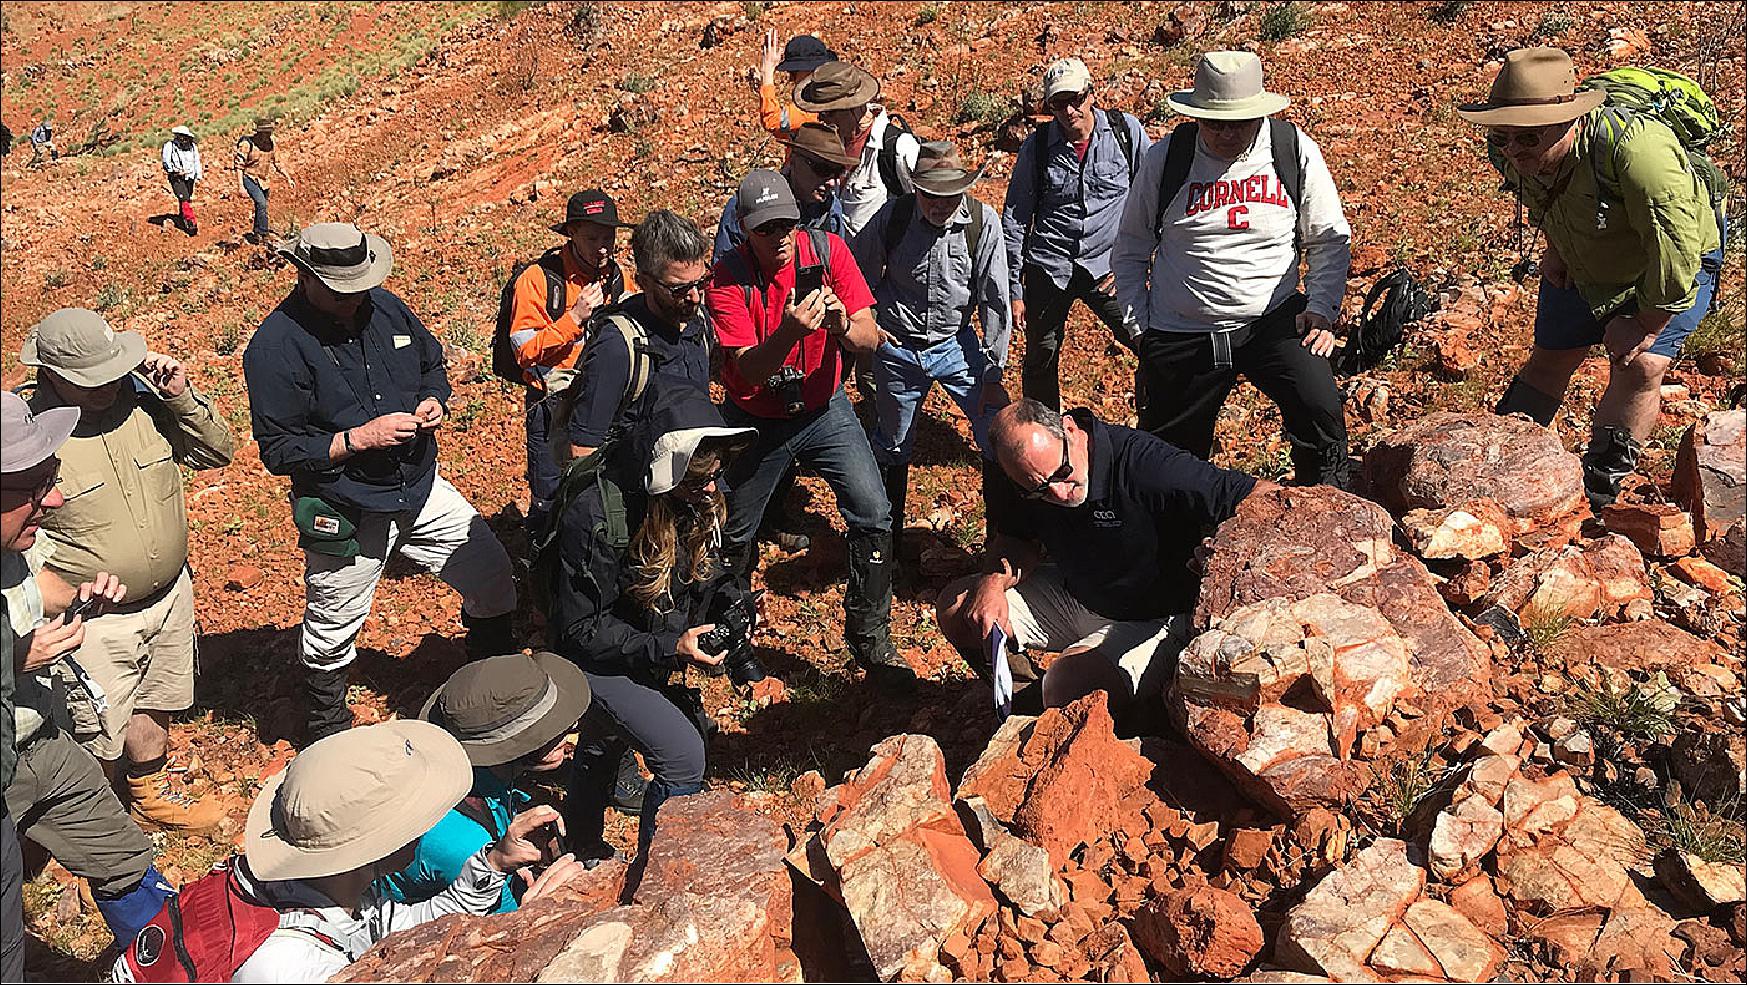 Figure 10: Scientists from NASA's Mars 2020 and ESA's ExoMars 2020 projects study stromatolites, the oldest confirmed fossilized lifeforms on Earth, in the Pilbara region of North West Australia. The image was taken on Aug. 19, 2019 (image credit: NASA/JPL-Caltech)